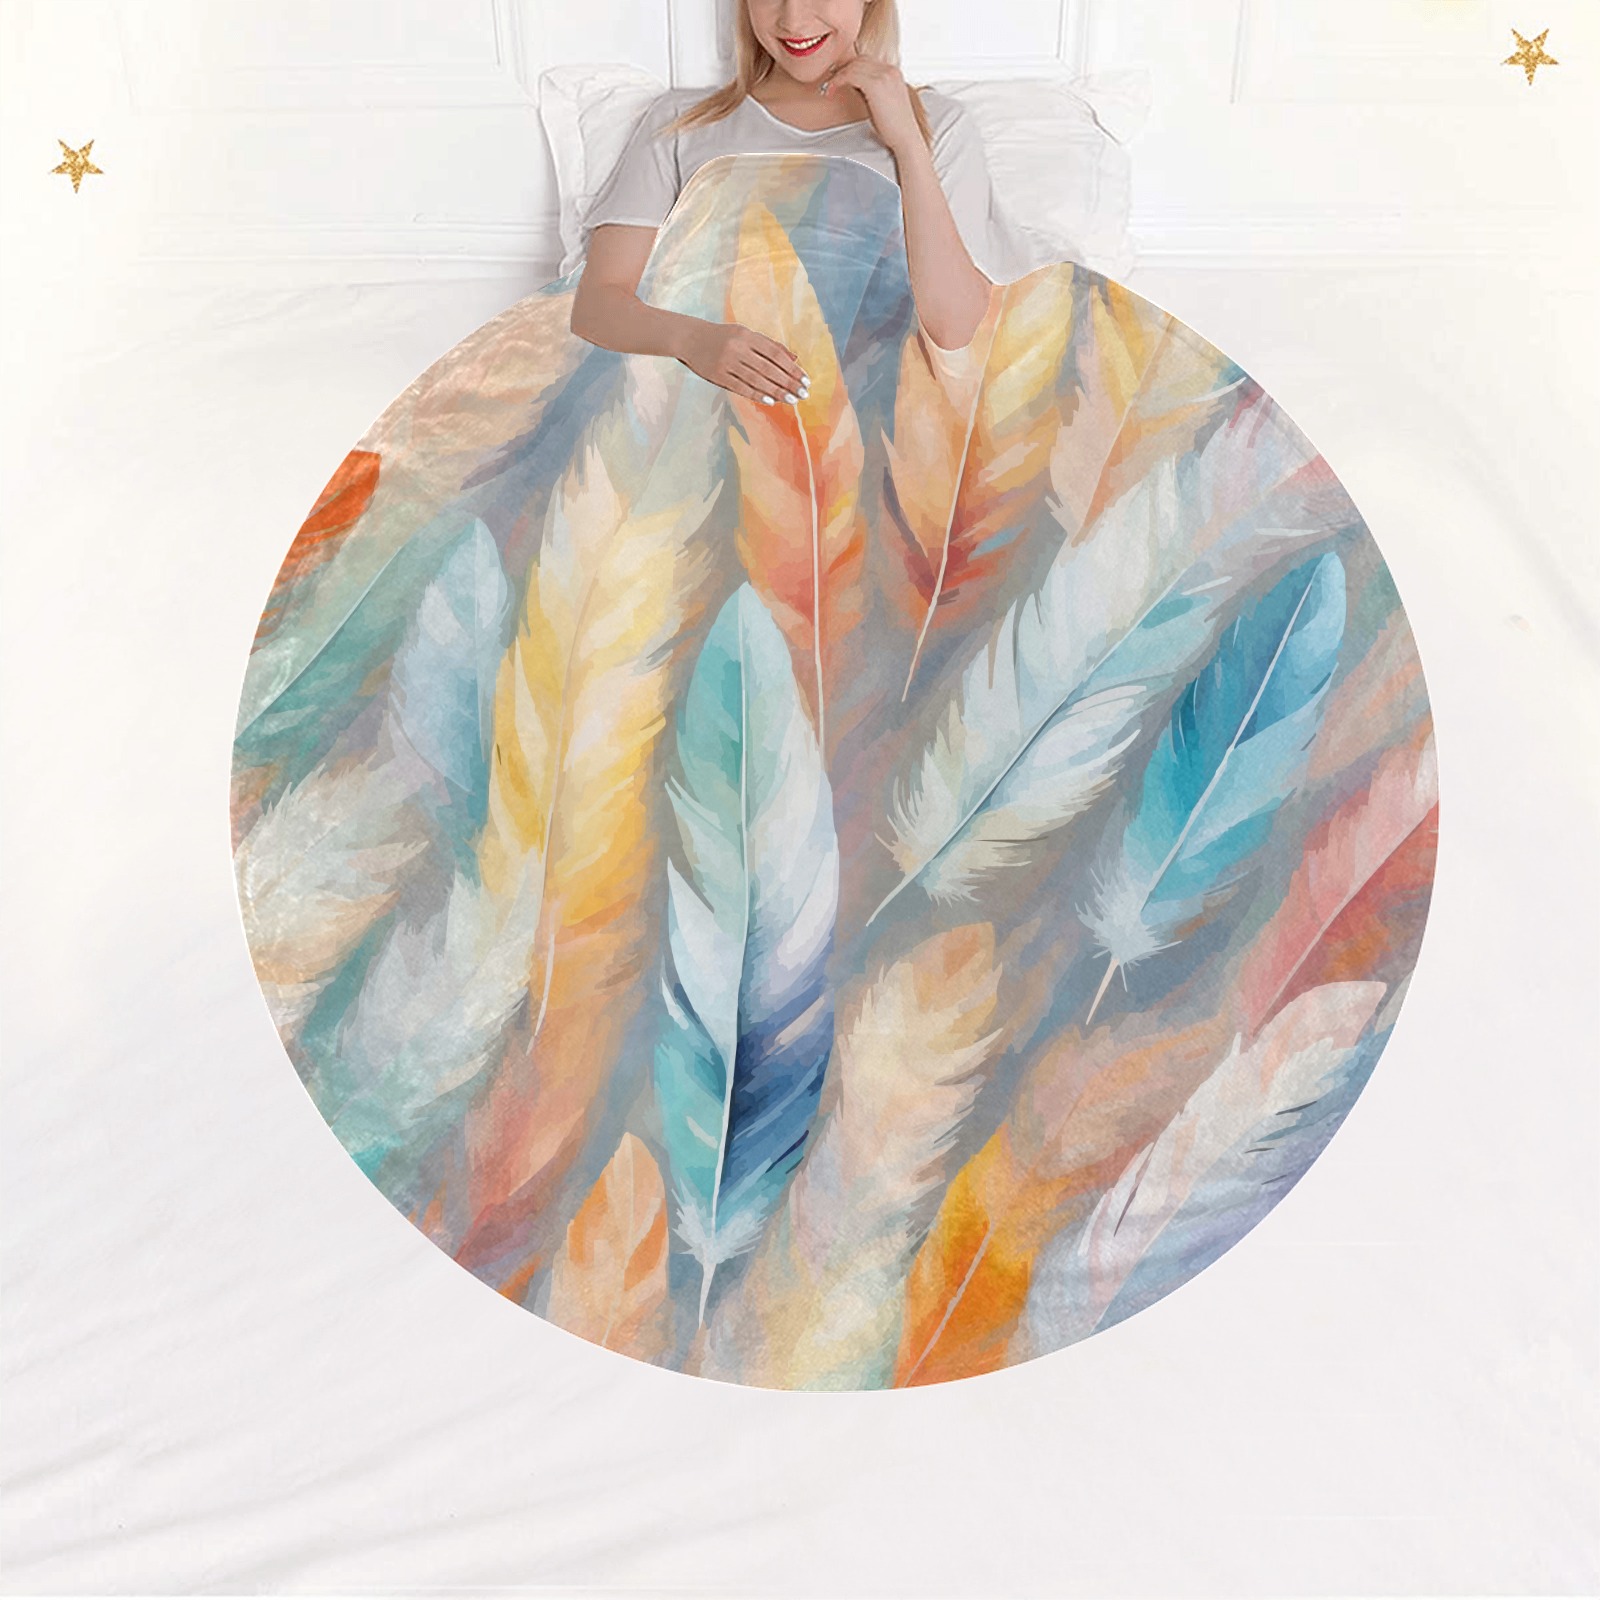 Charming feathers fantasy art. Chic pastel colors. Circular Ultra-Soft Micro Fleece Blanket 60"